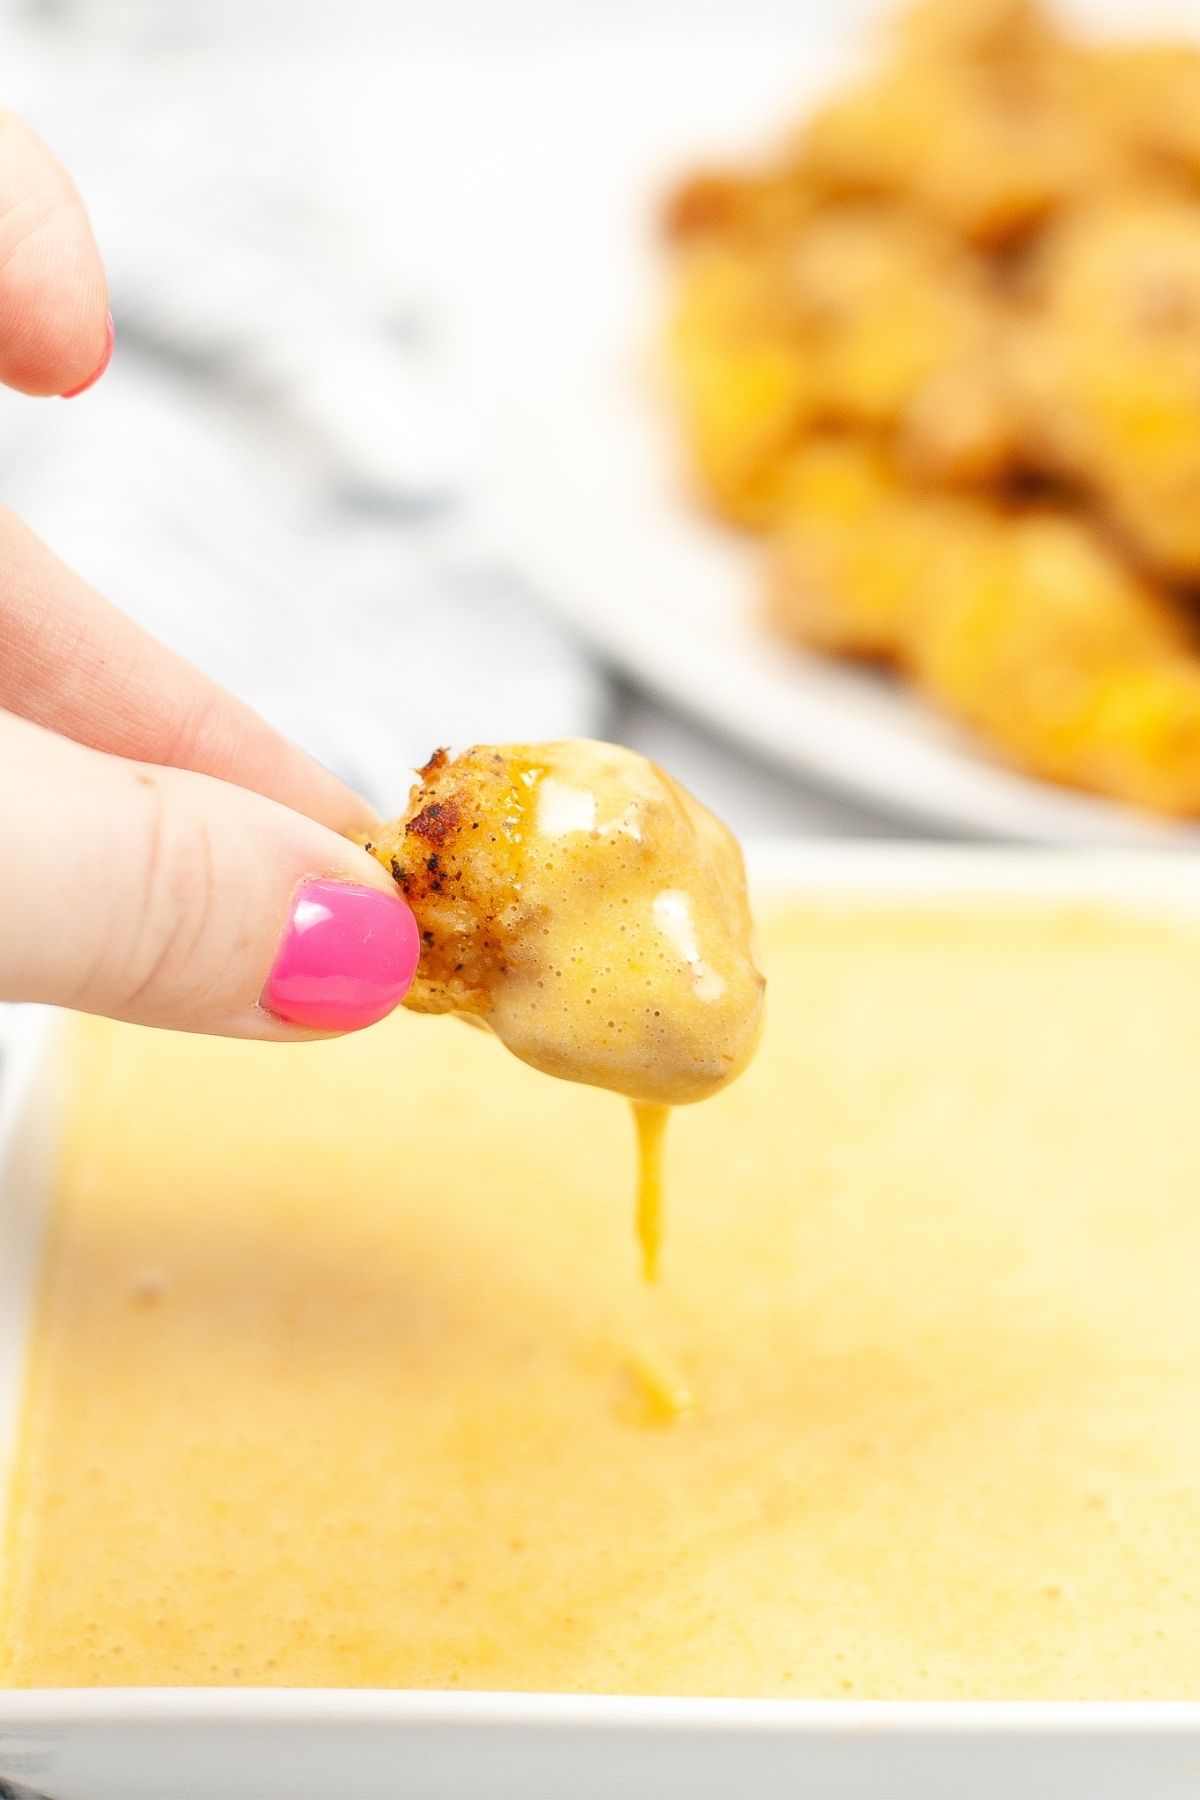 chicken nugget being dipped into yellow chick-fil-a sauce